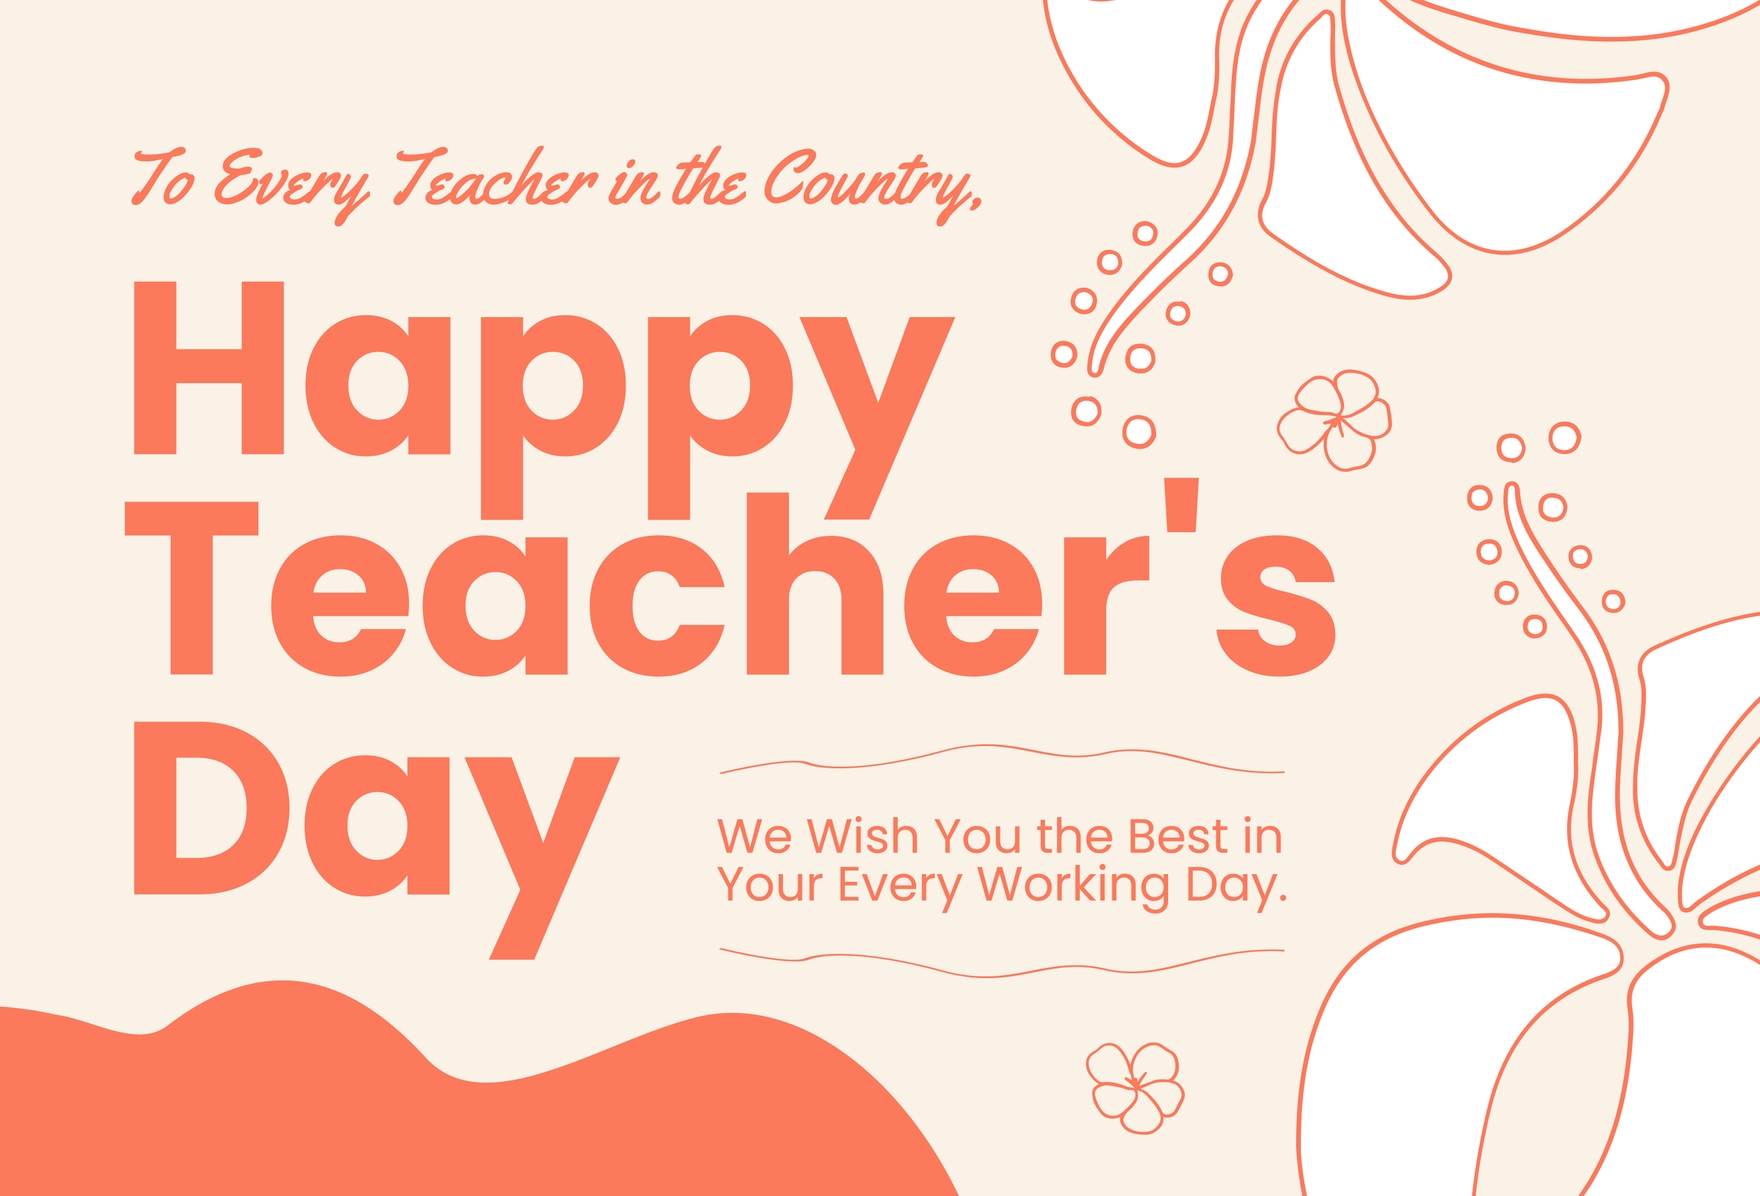 Free Teacher's Day Message Wishes in Word, Illustrator, PSD